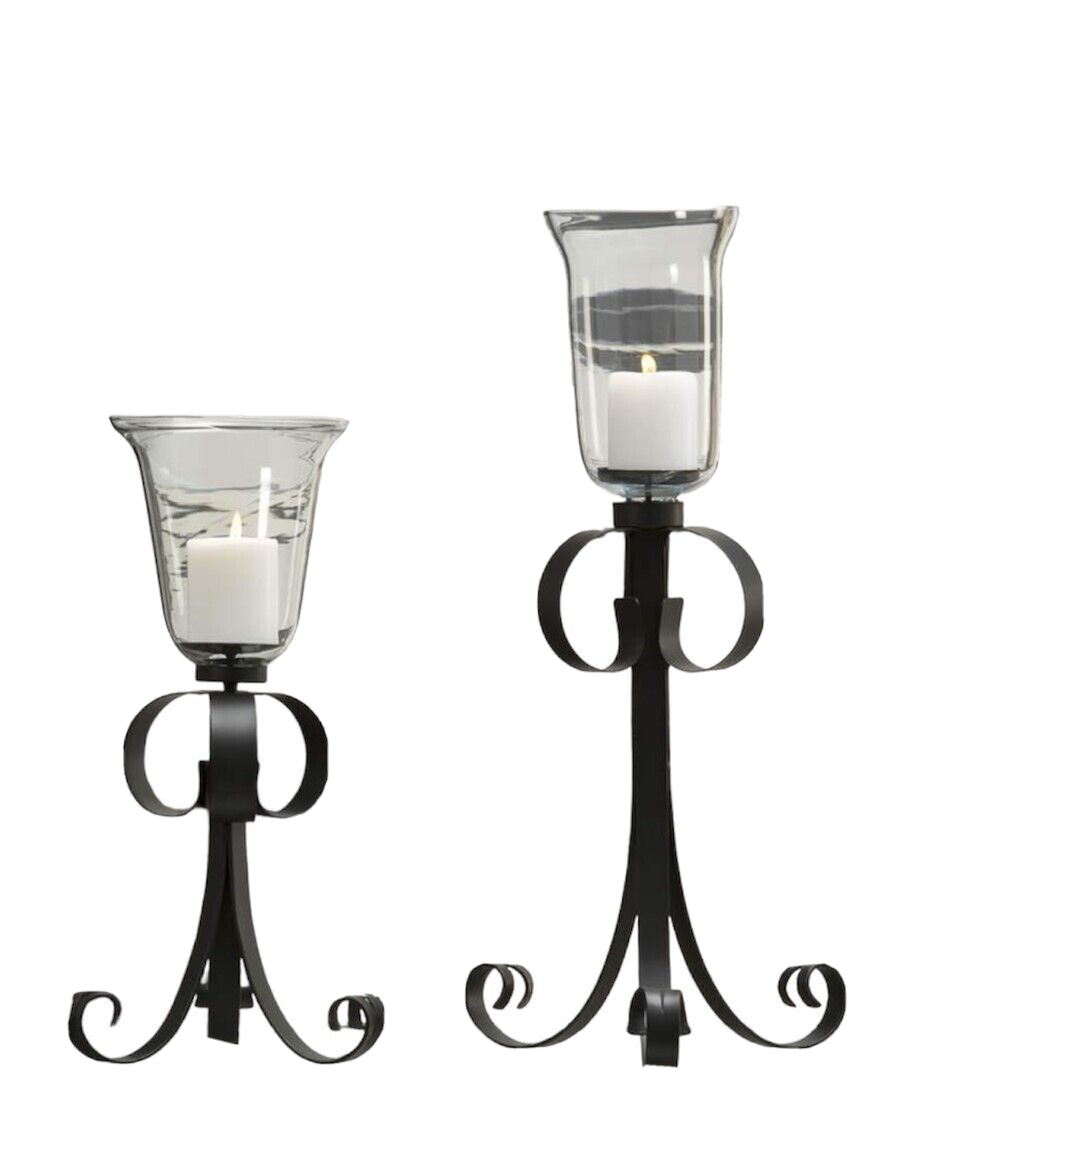 Pedestal Candle Holder Set Of 2 Black Iron With Glass Holders 199 And 25 High Candle 5624